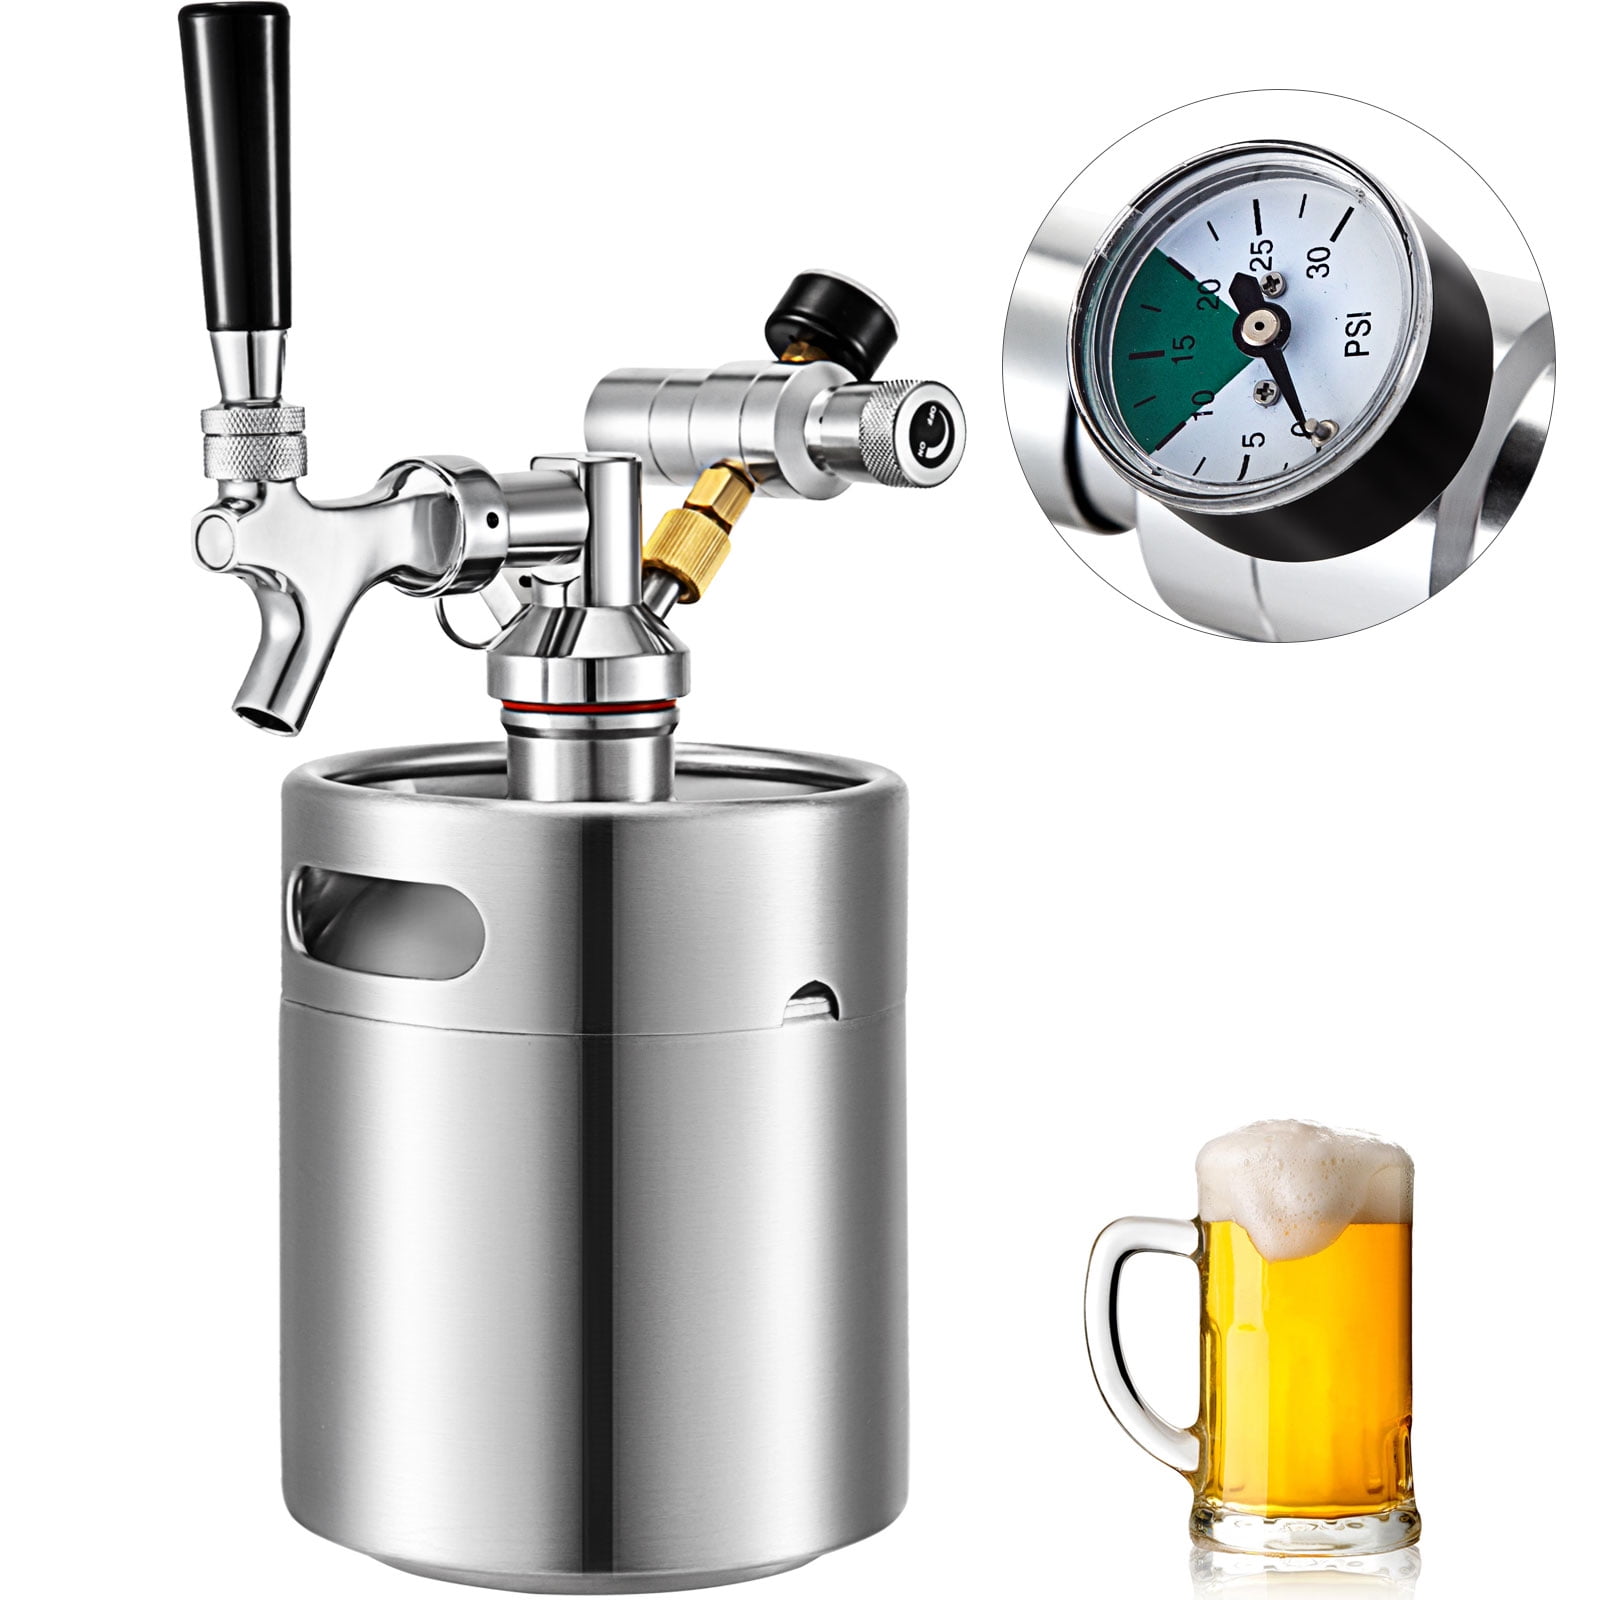 5L Mini Party Keg Draft Beer Tap Dispenser Portable Home Brew Bar Germany made 